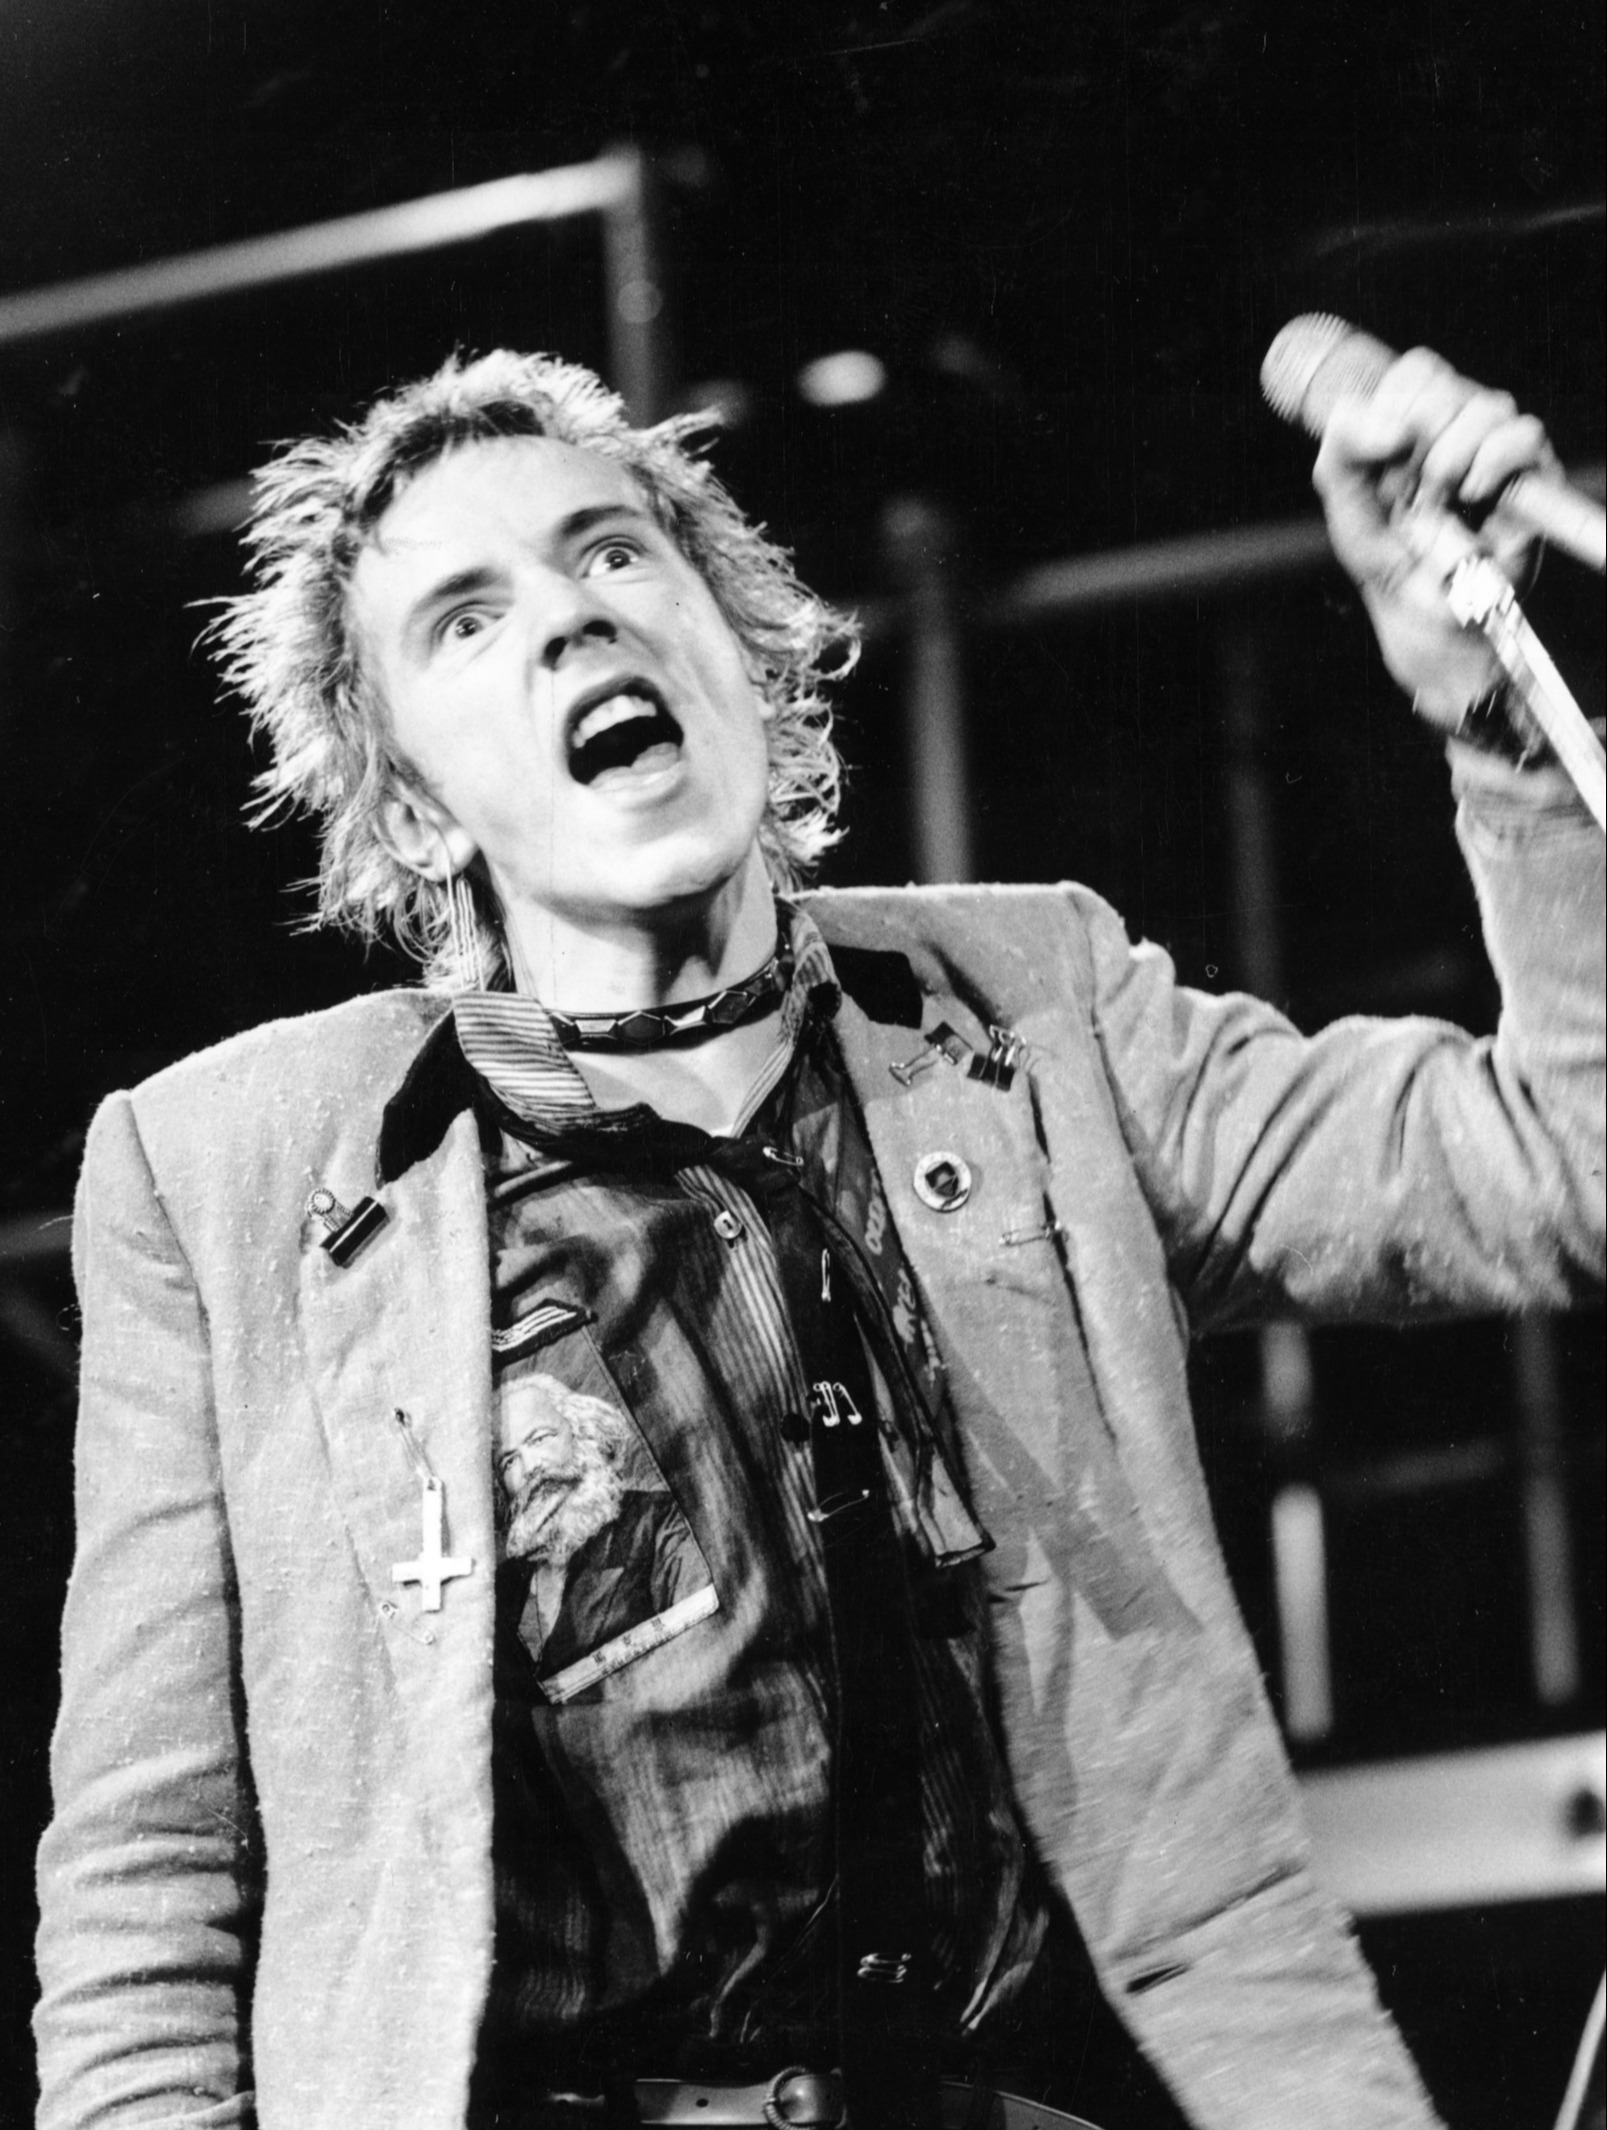 Despite his issues with Cook and Jones, Lydon remains immensely proud of the Sex Pistols' classic album Never Mind The Bollocks, Here’s The Sex Pistols